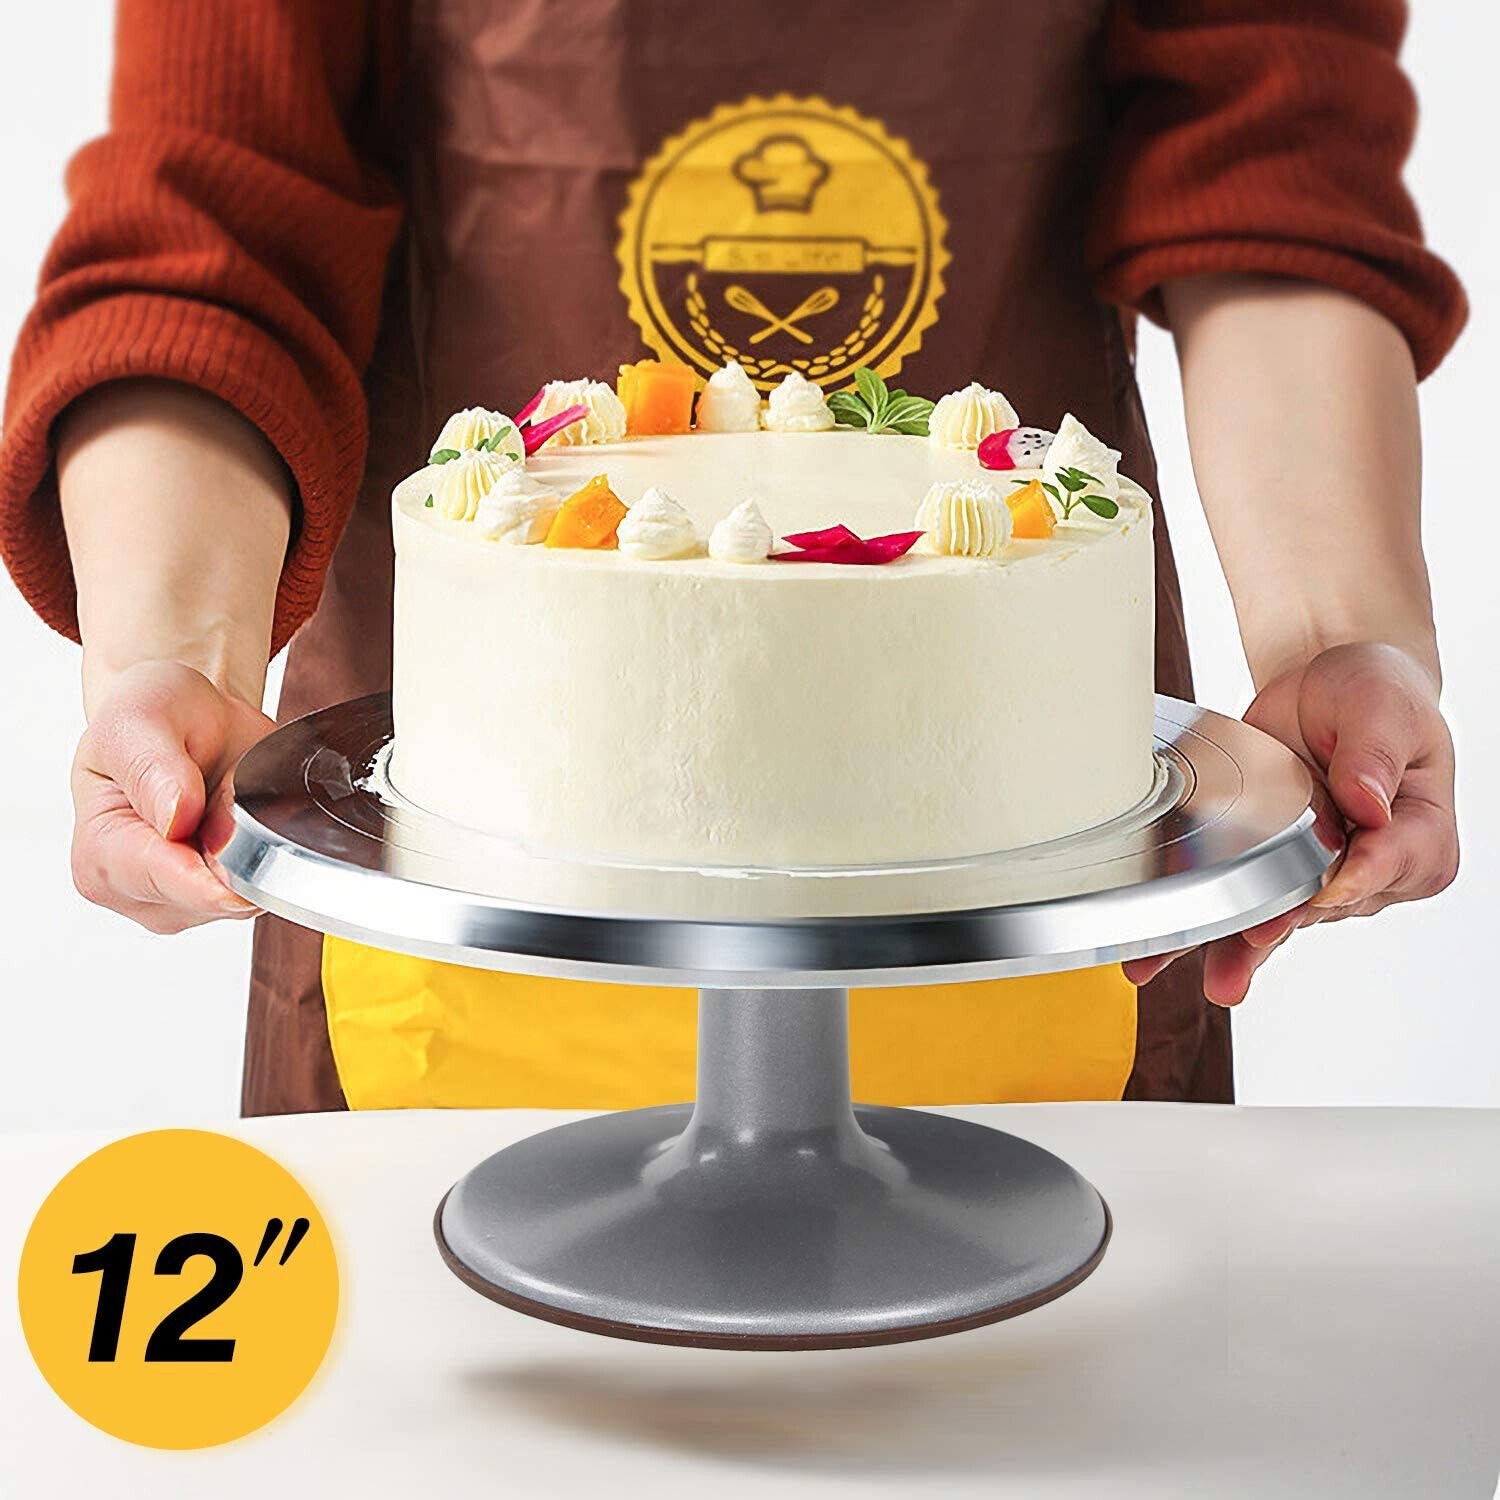 We love our ATECO Cake Decorating Turntable [ Product Reviews ] 